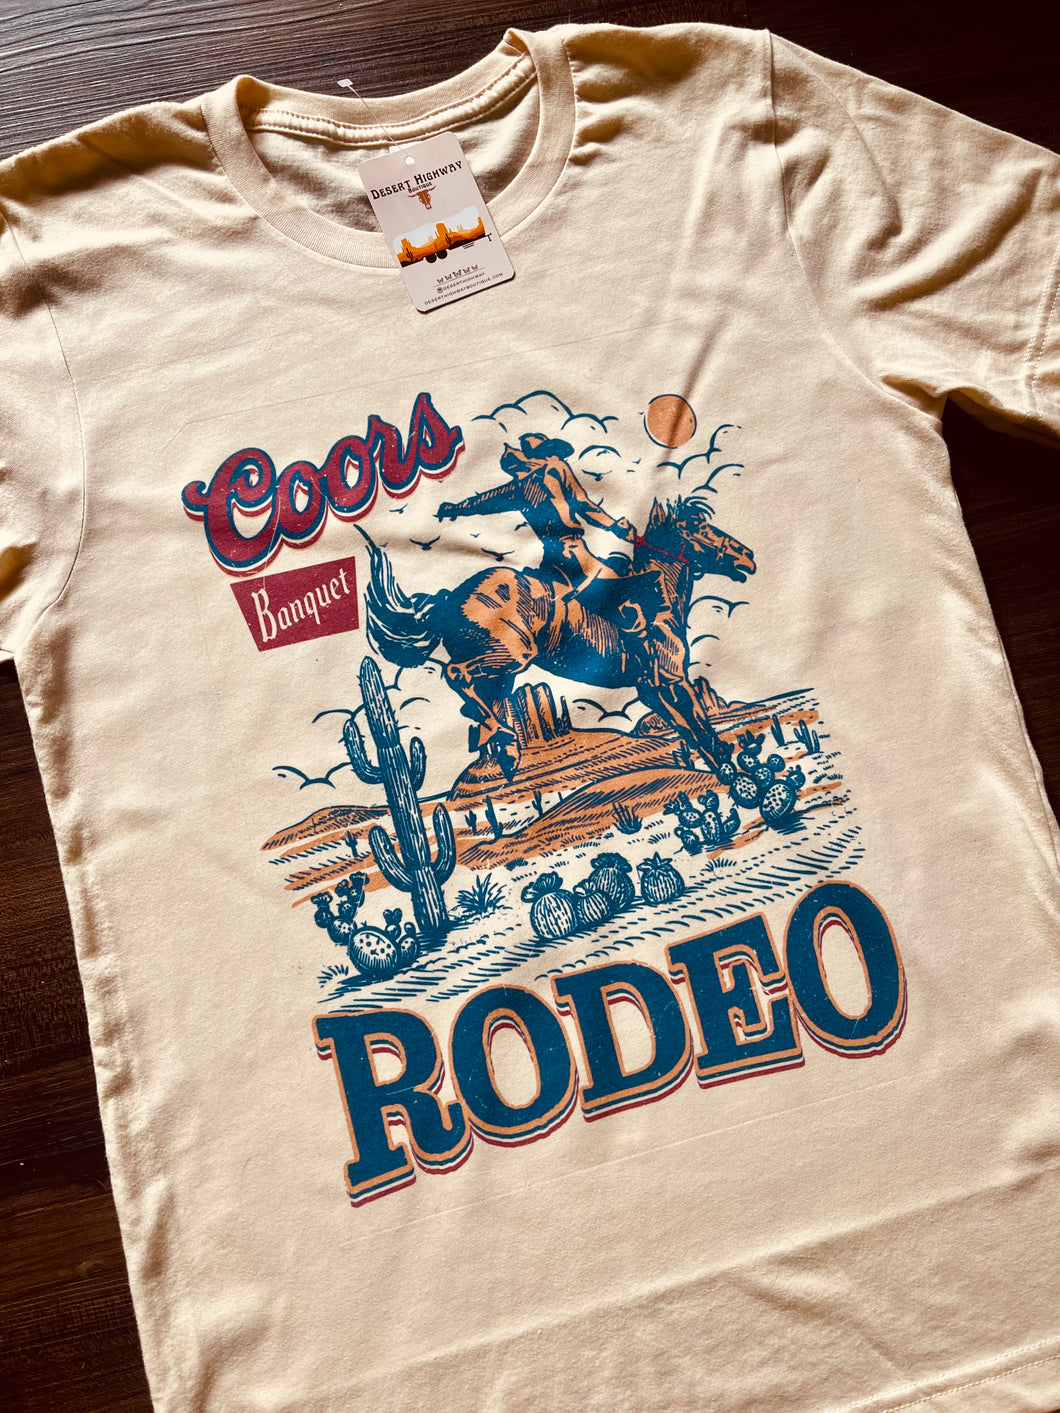 Coors Banquet Rodeo Tee